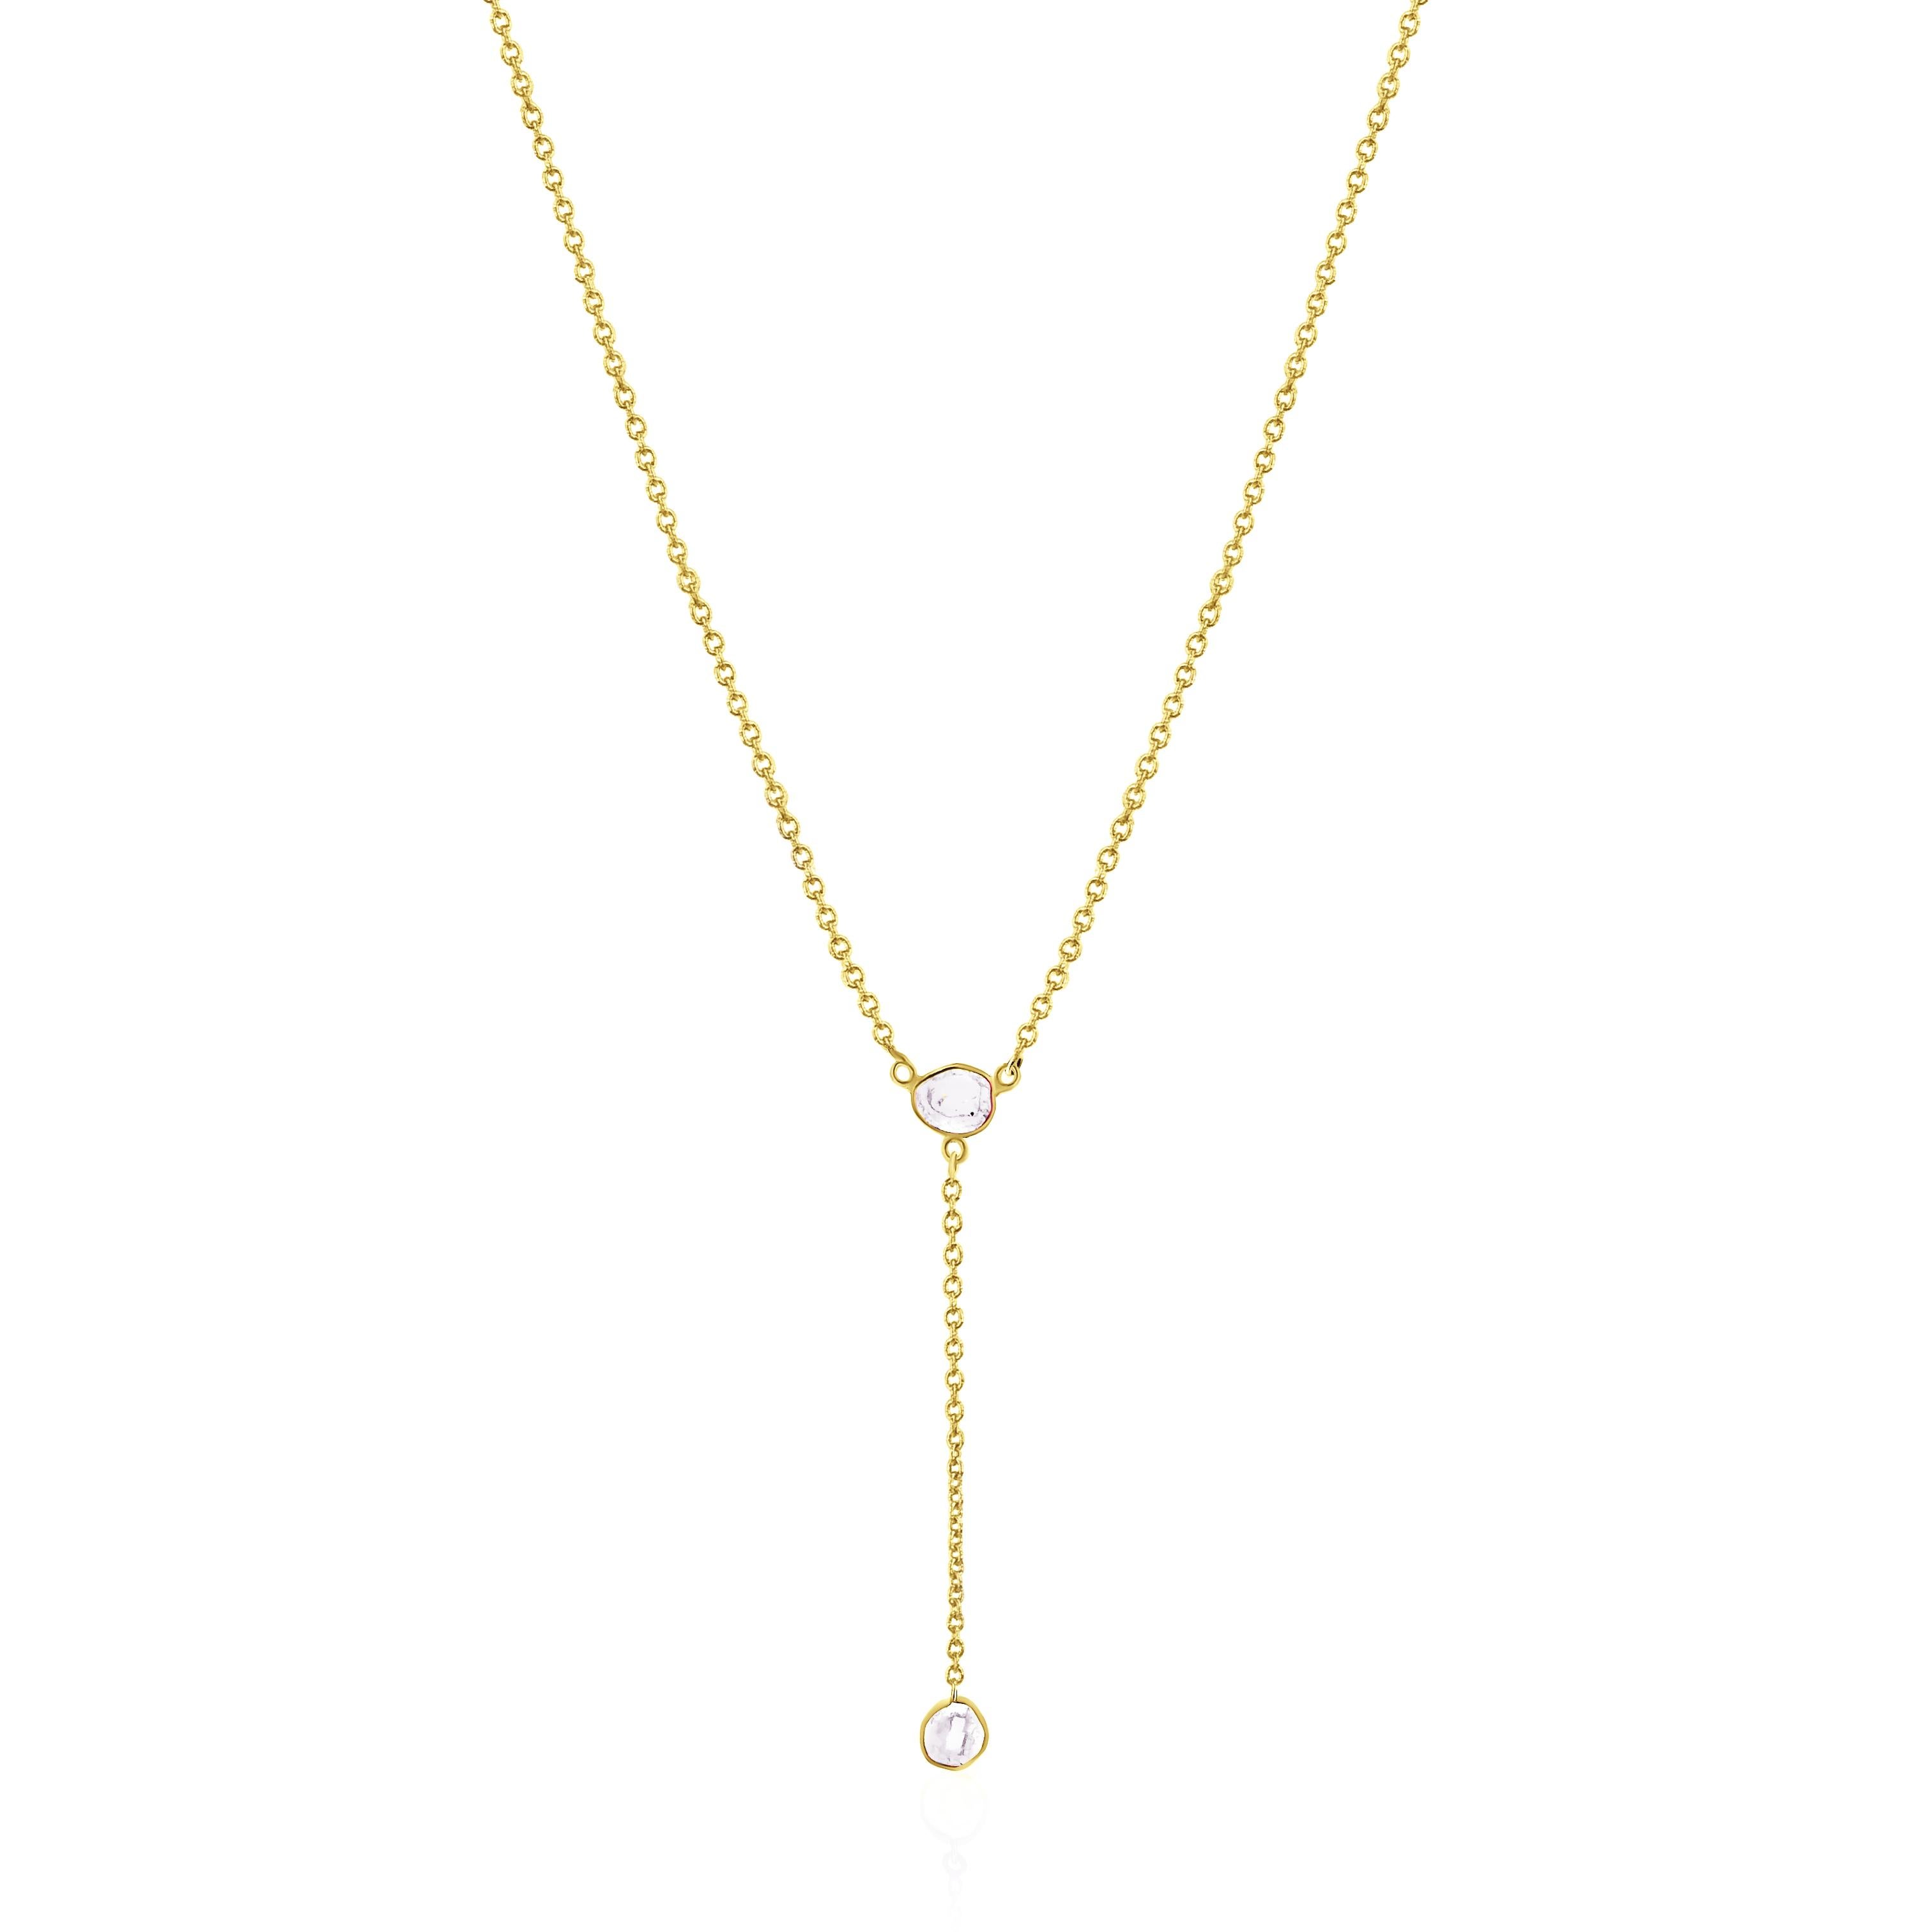 Rock & Divine Lily Pad Lariat Diamond Necklace in 18K Yellow Gold F VS 0.20ctw

PRIMARY DETAILS
SKU: 102459
Listing Title: Rock & Divine Lily Pad Lariat Diamond Necklace in 18K Yellow Gold F VS 0.20ctw
Condition Description: Retails for 1250 USD. In